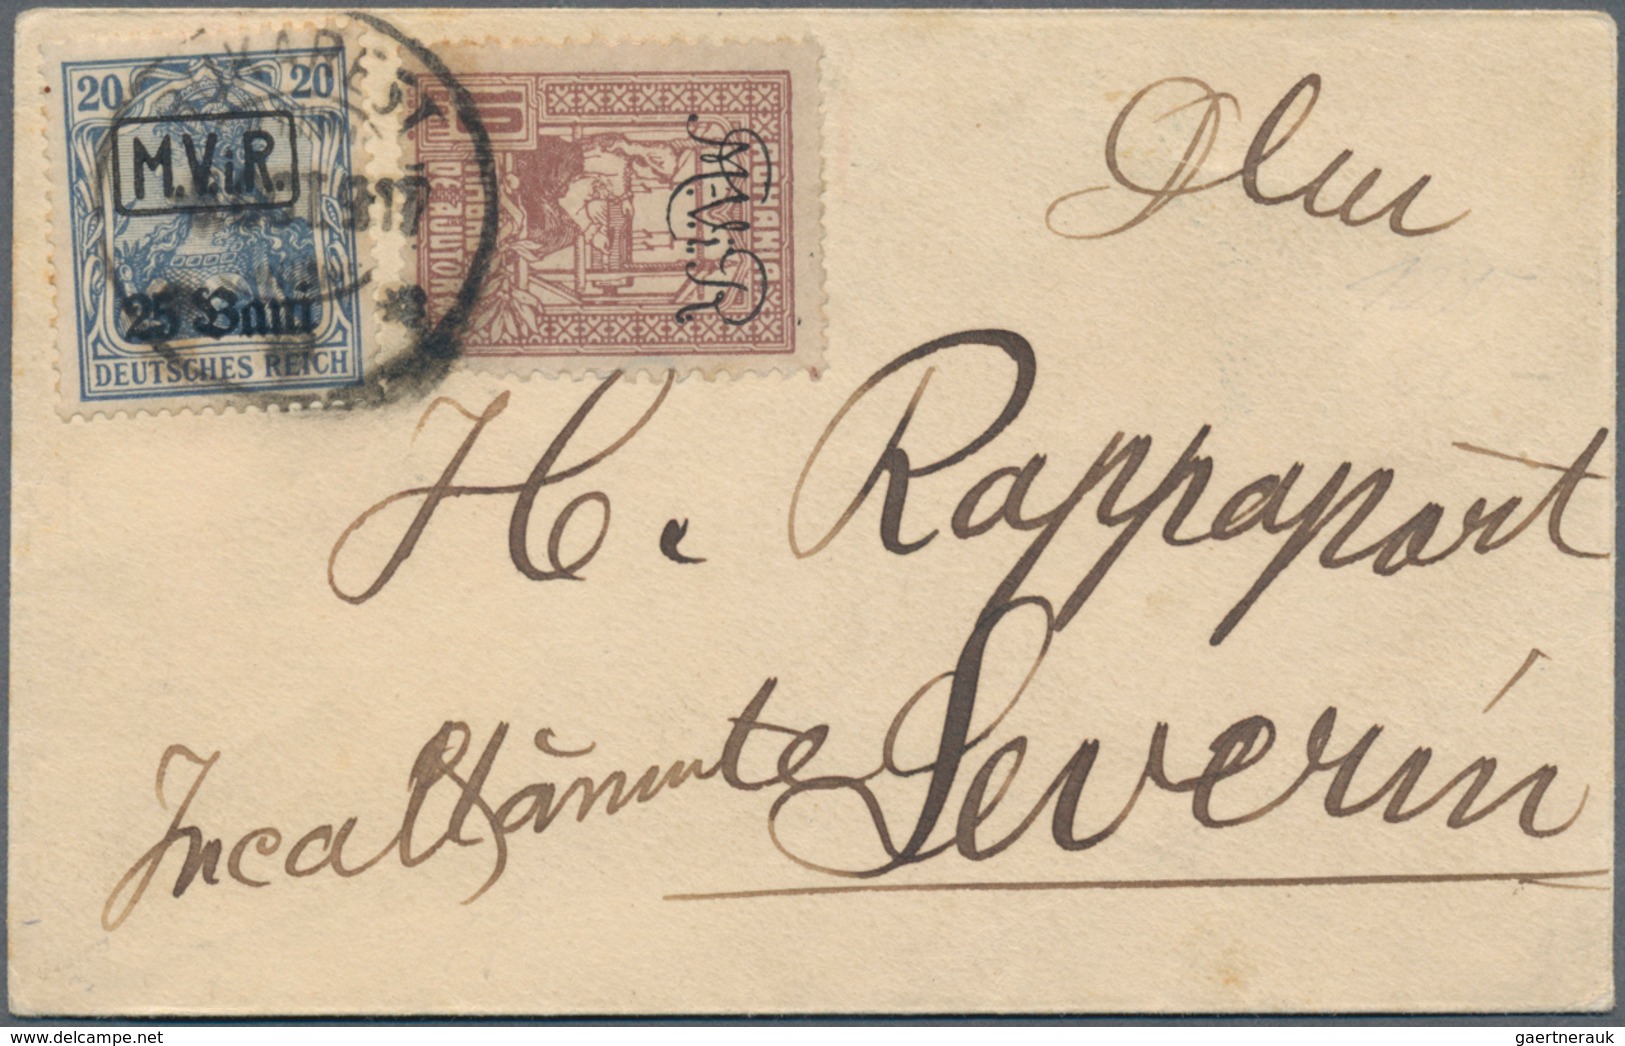 Alle Welt: 1900/2000 (ca.), accumulation of several hundred covers/cards, comprising commercial and